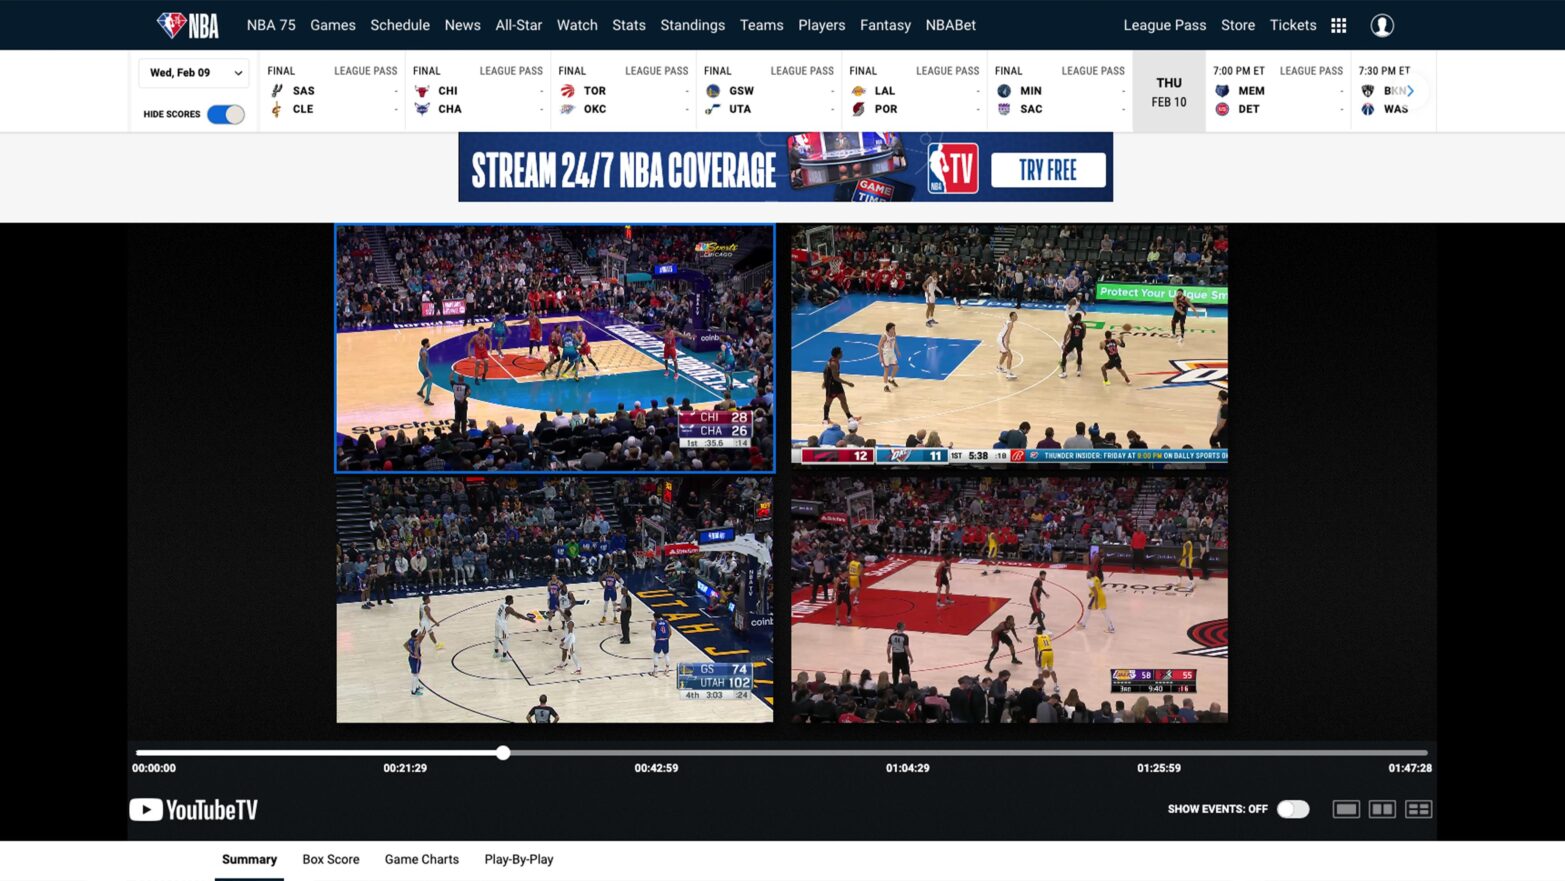 The NBA League Pass game view displays four games at once.